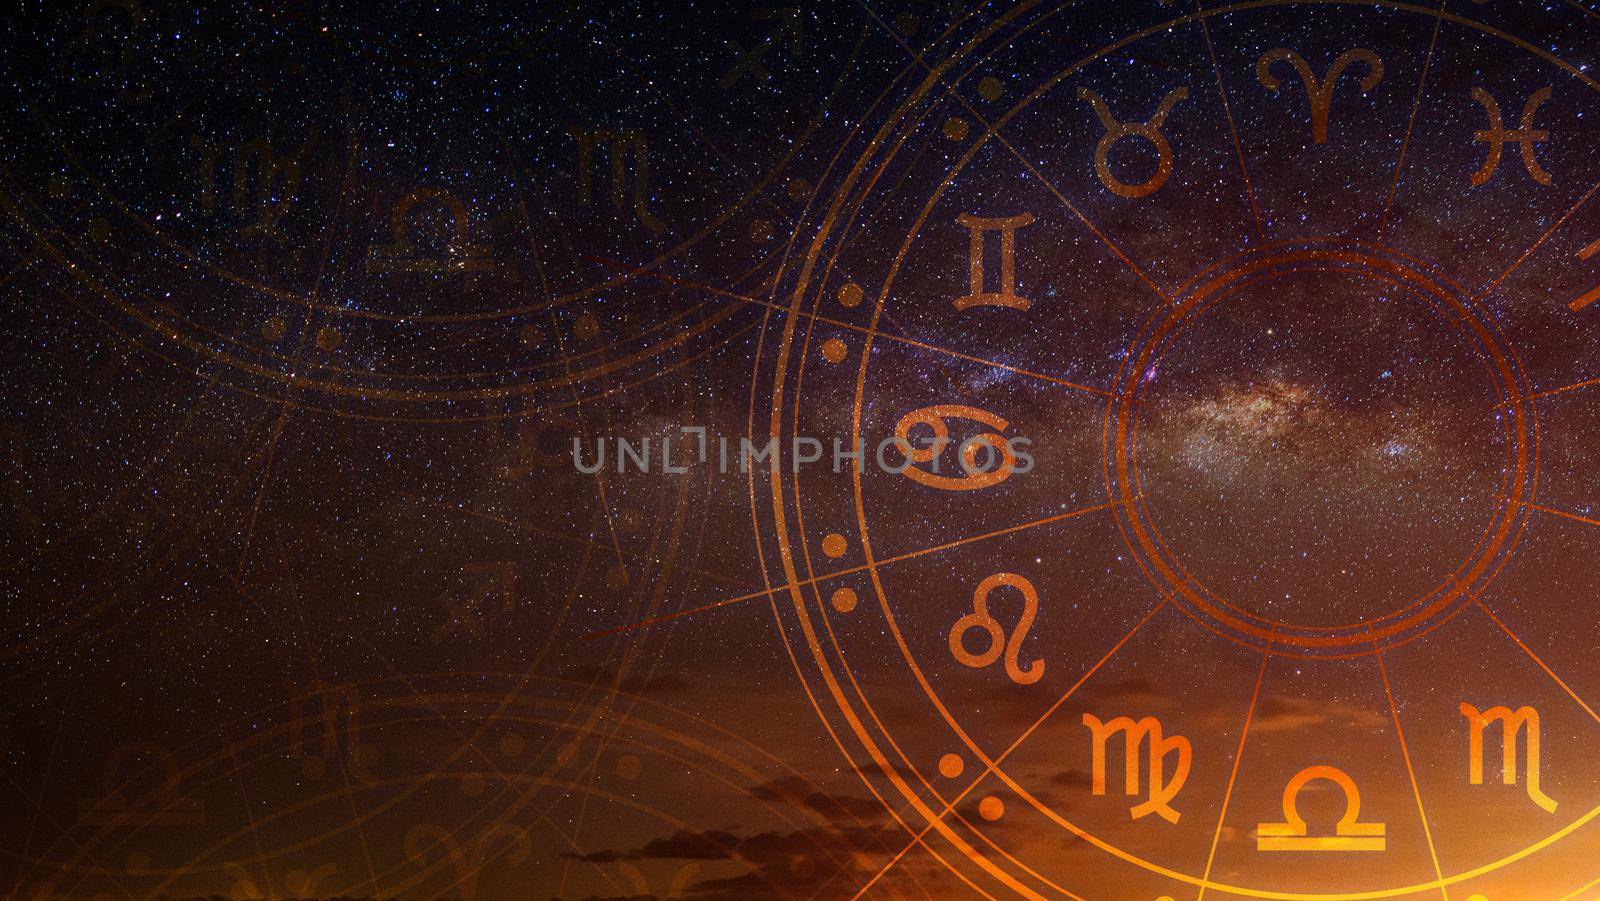 Astrological zodiac signs inside of horoscope circle. Astrology, knowledge of stars in the sky over the milky way and moon. The power of the universe concept. by thanumporn